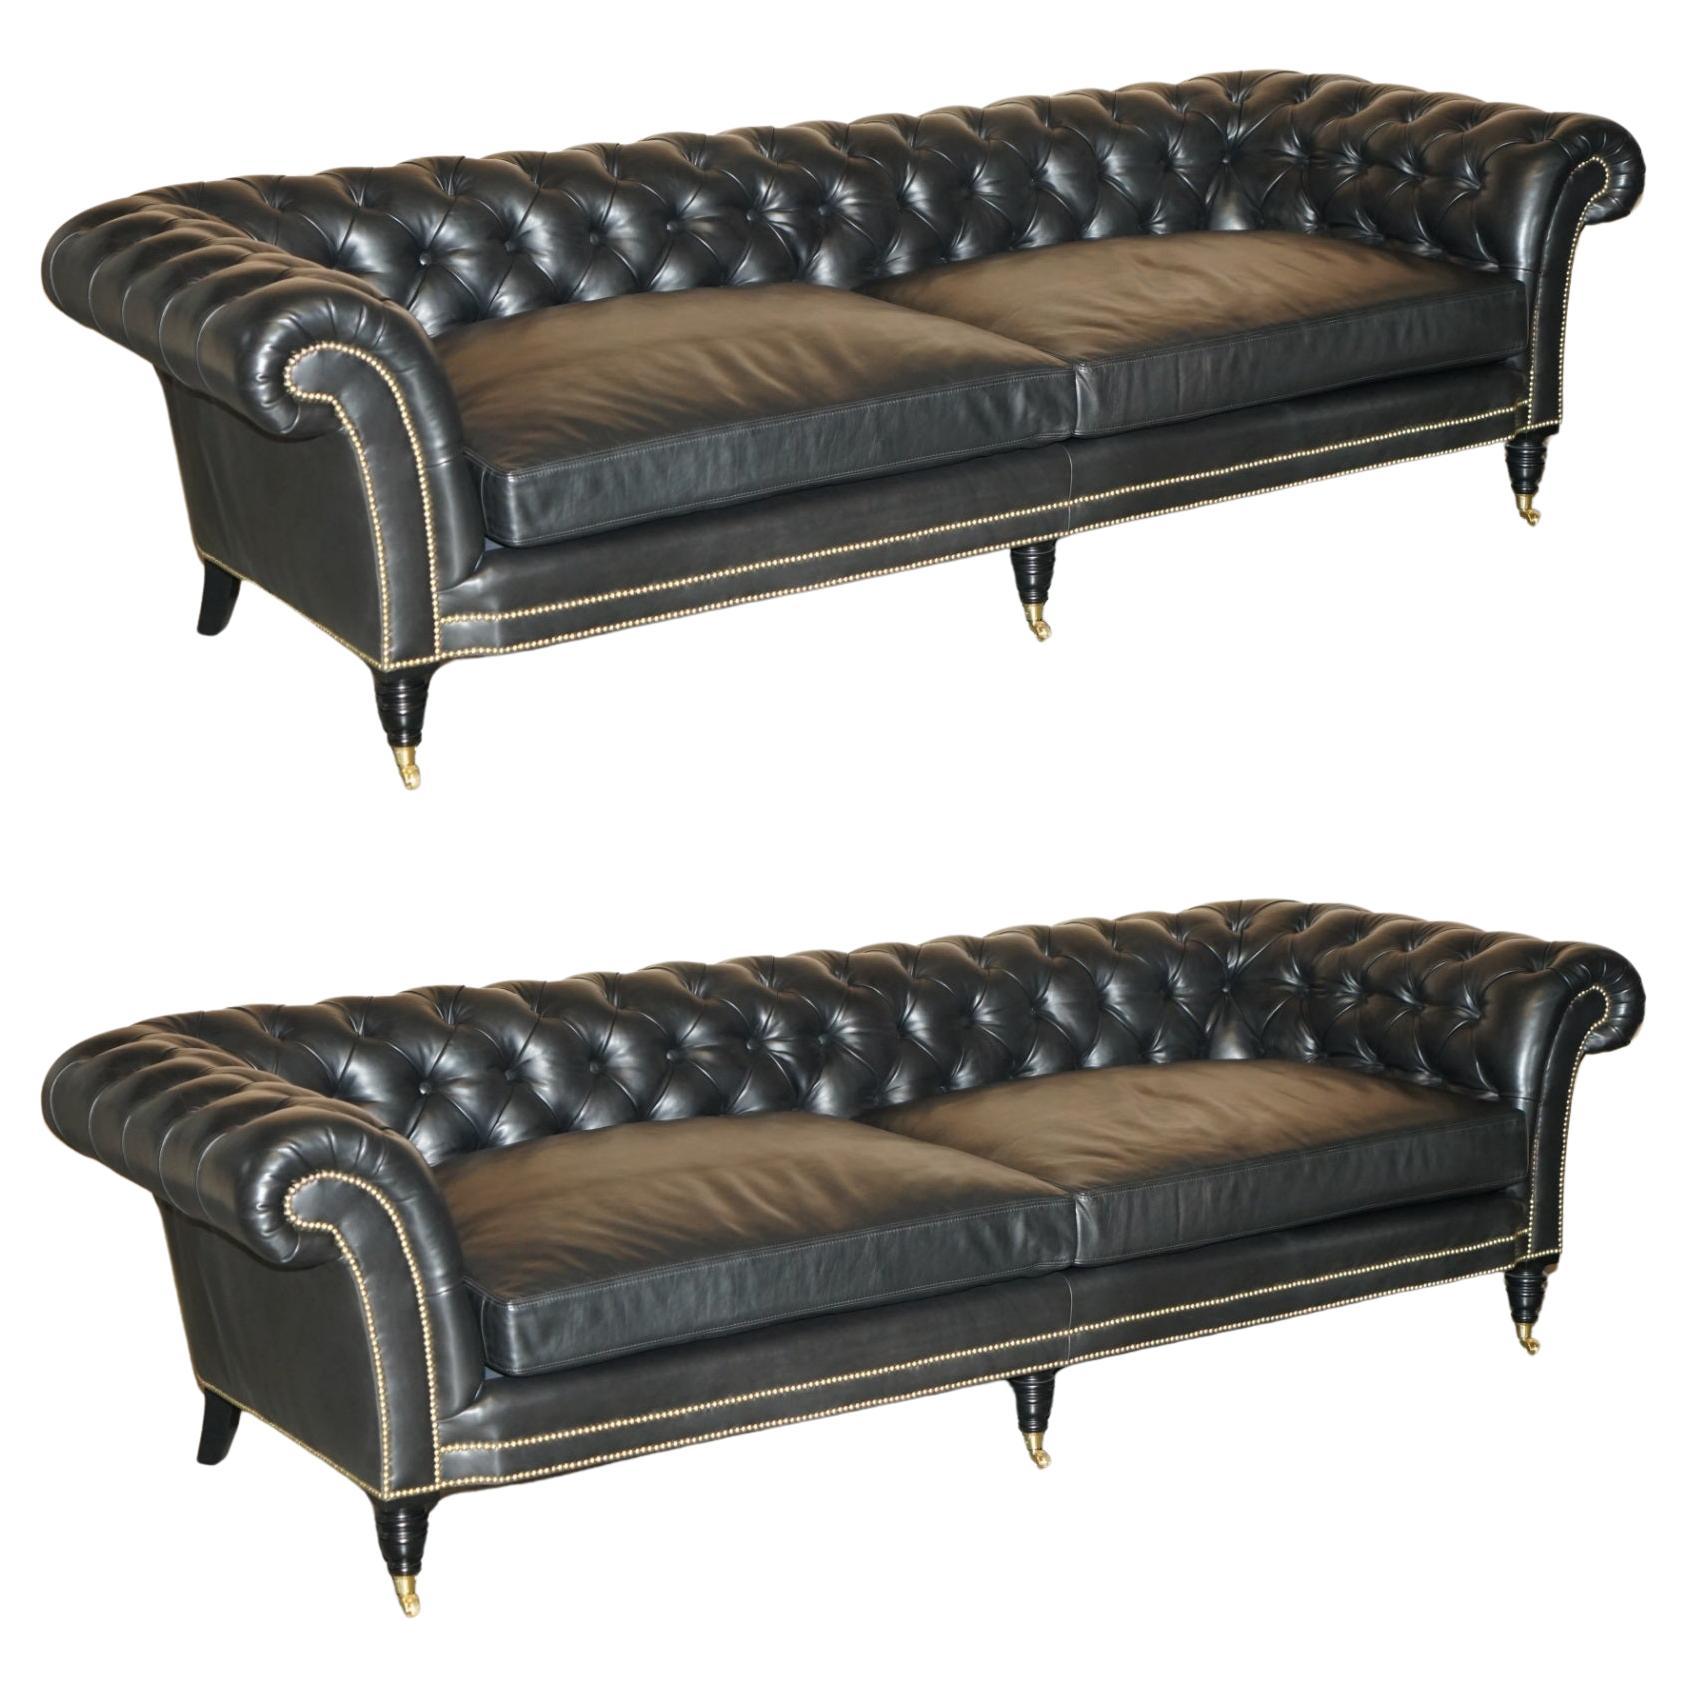 EXQUISITE PAIR OF RALPH LAUREN BROOK STREET BLACK LEATHER CHESTERFIELD SOFAs For Sale